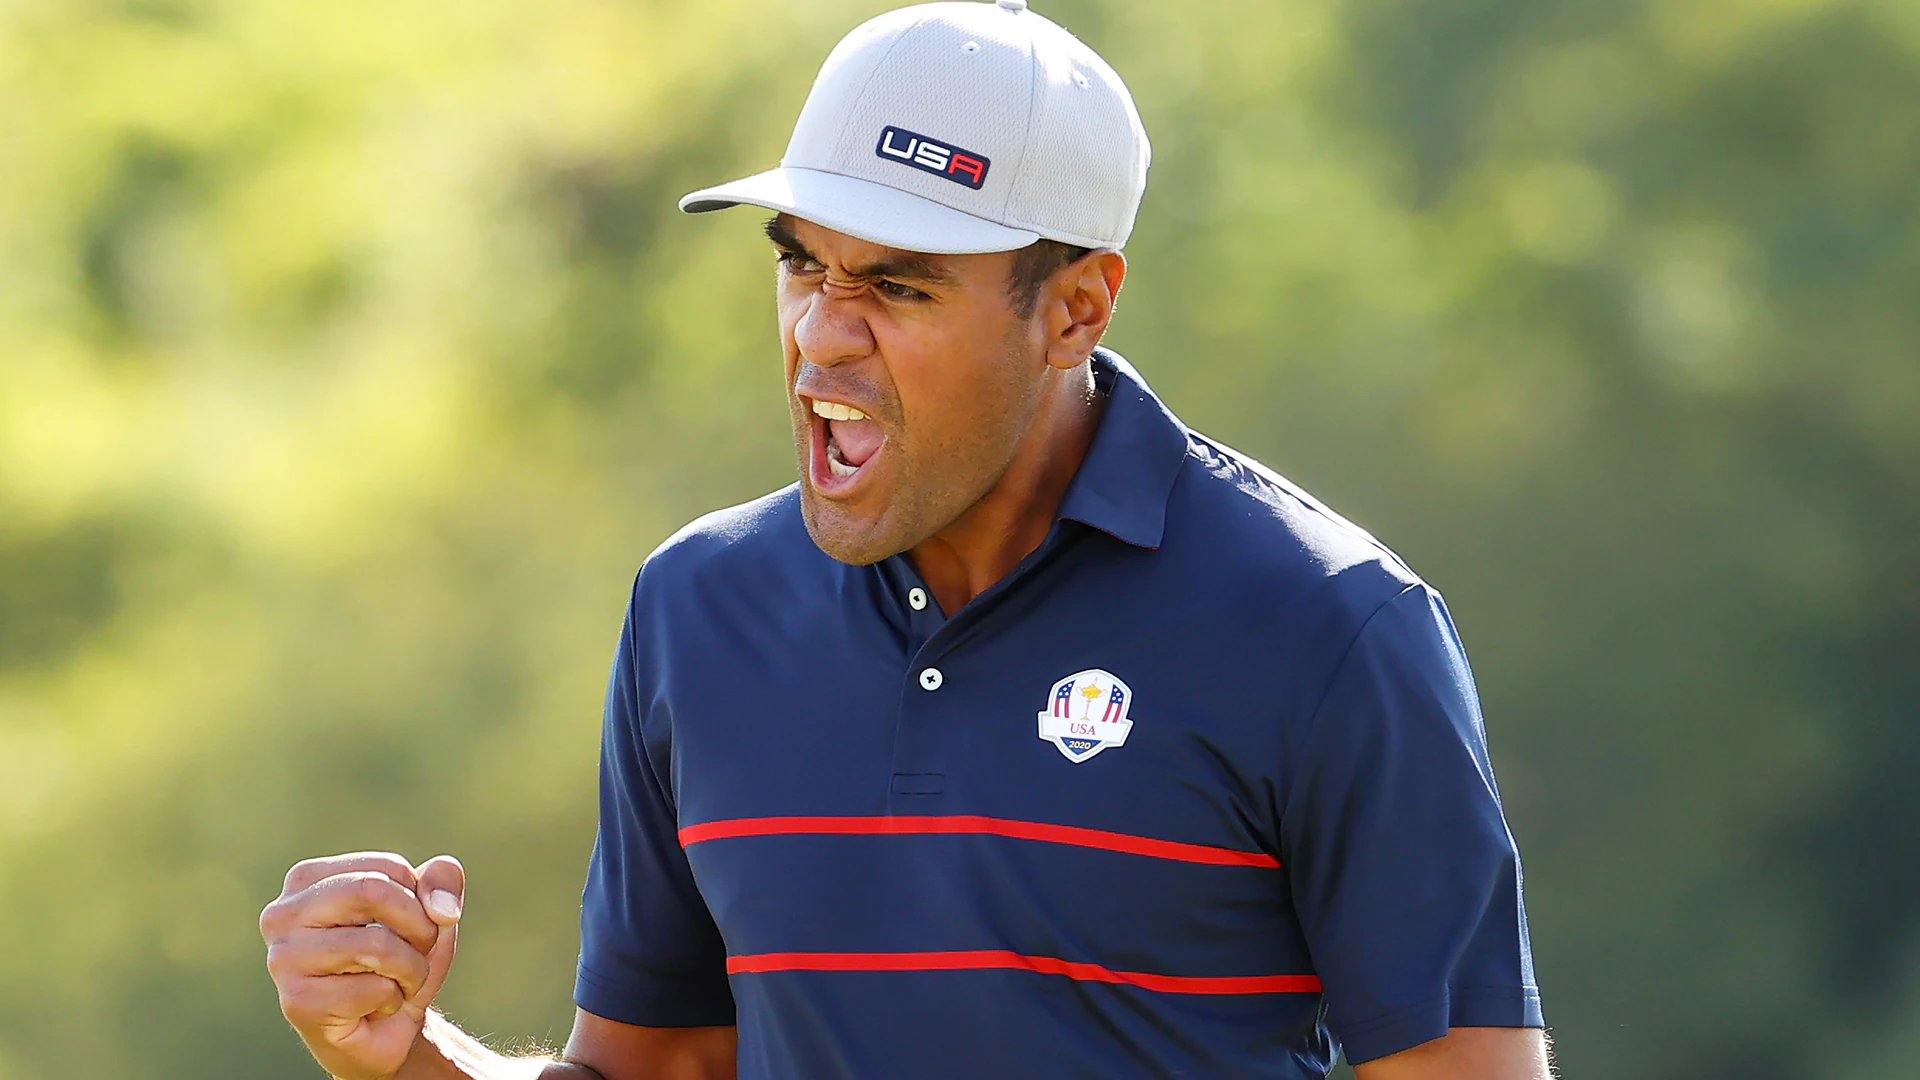 2020 Ryder Cup recaps: U.S. controls fourballs, leads 6-2 after Day 1